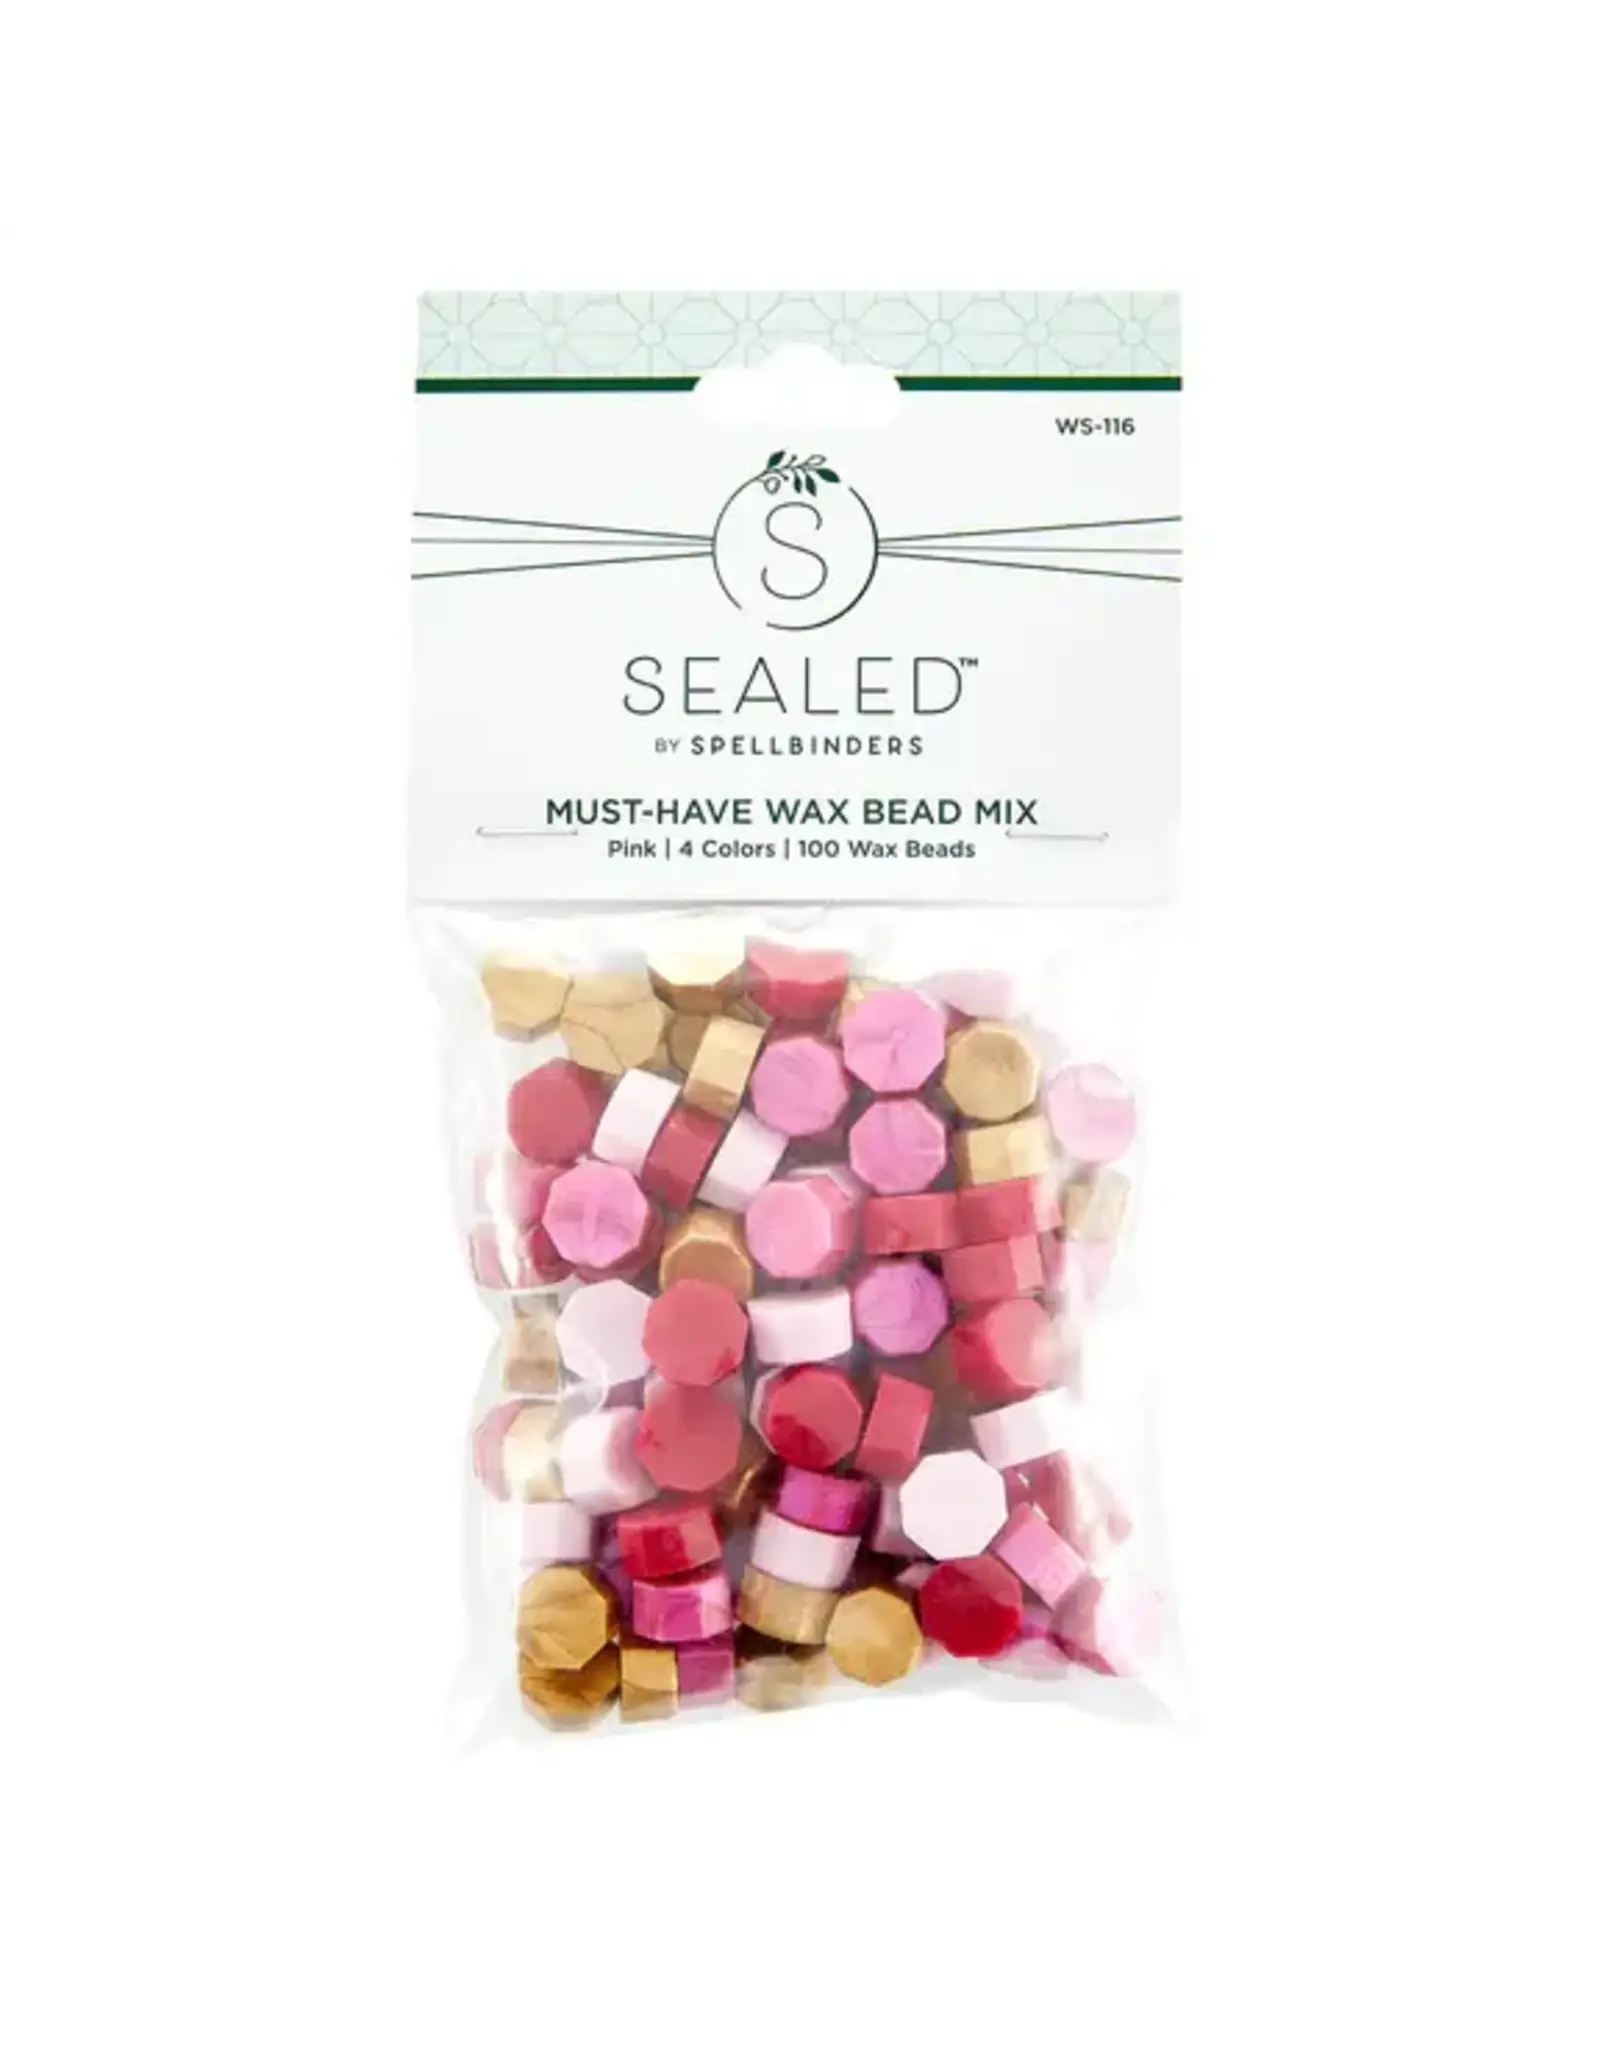 SPELLBINDERS SPELLBINDERS SEALED BY SPELLBINDERS COLLECTION PINK MUST-HAVE WAX BEAD MIX 100/PK